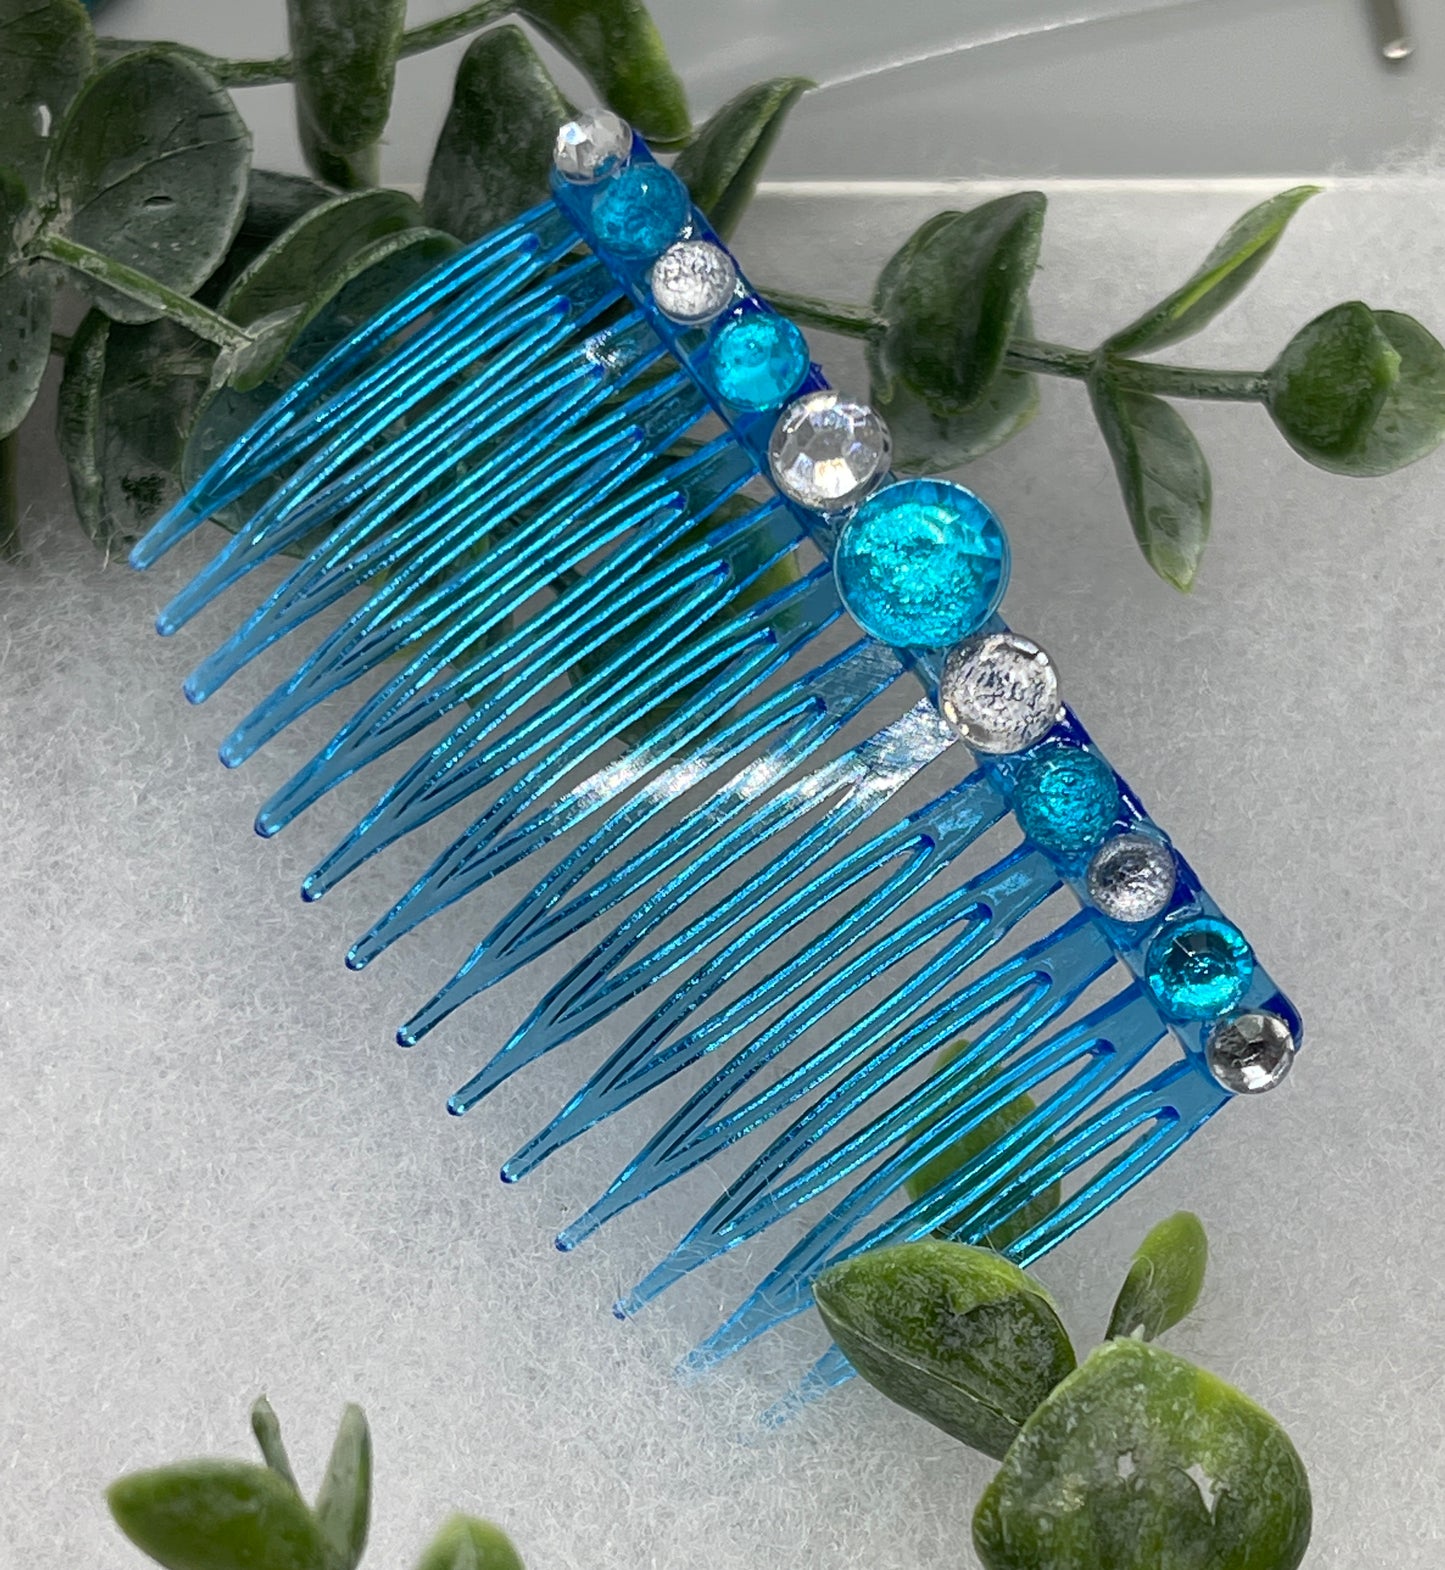 Teal faux crystal side comb 3.0” blue  plastic hair accessory bridal wedding Retro Bridal Party Prom Birthday gifts